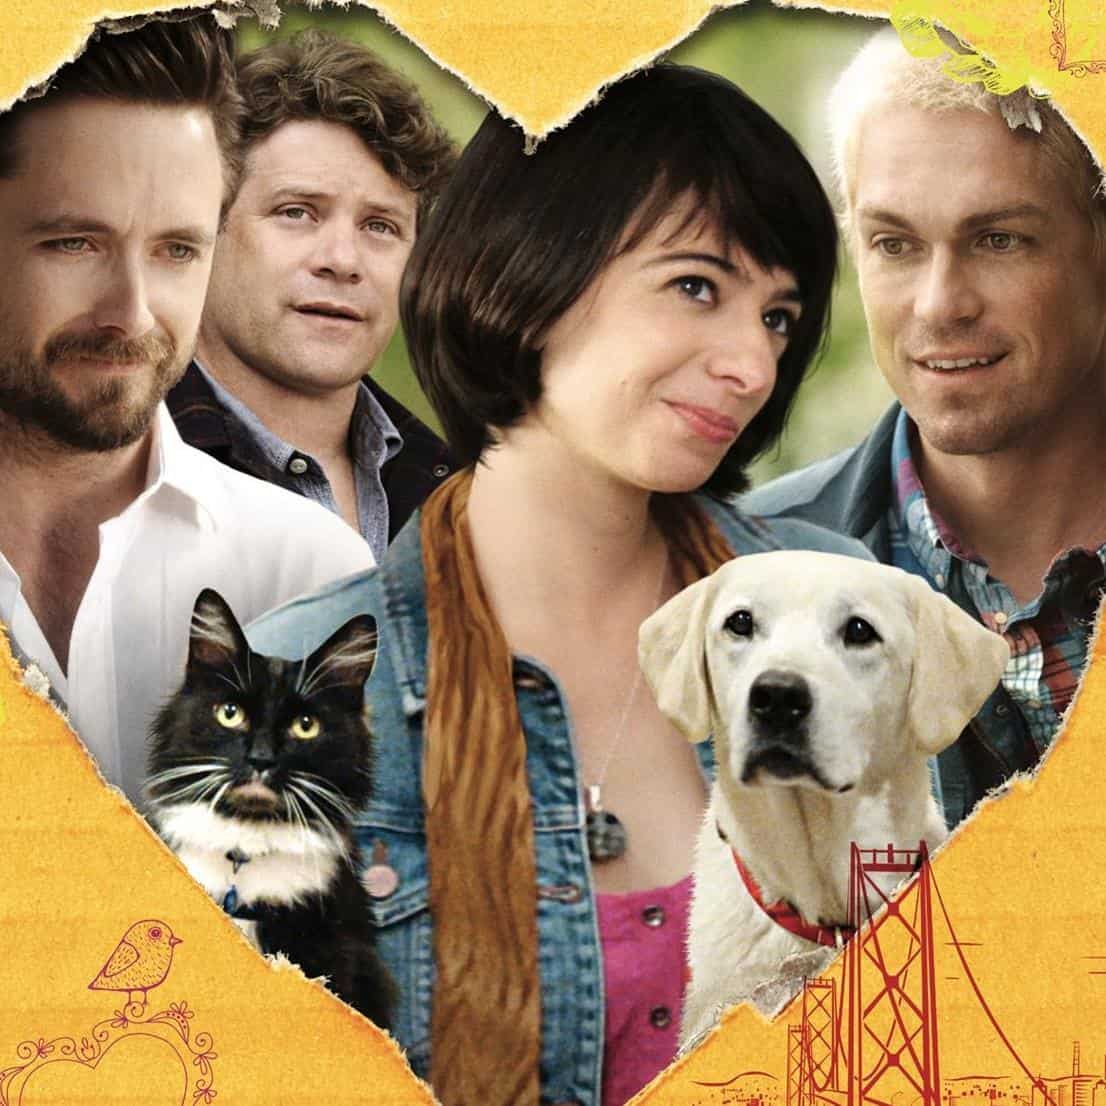 Unleashed: Love is a Four-Legged Word [Romantic Comedy]